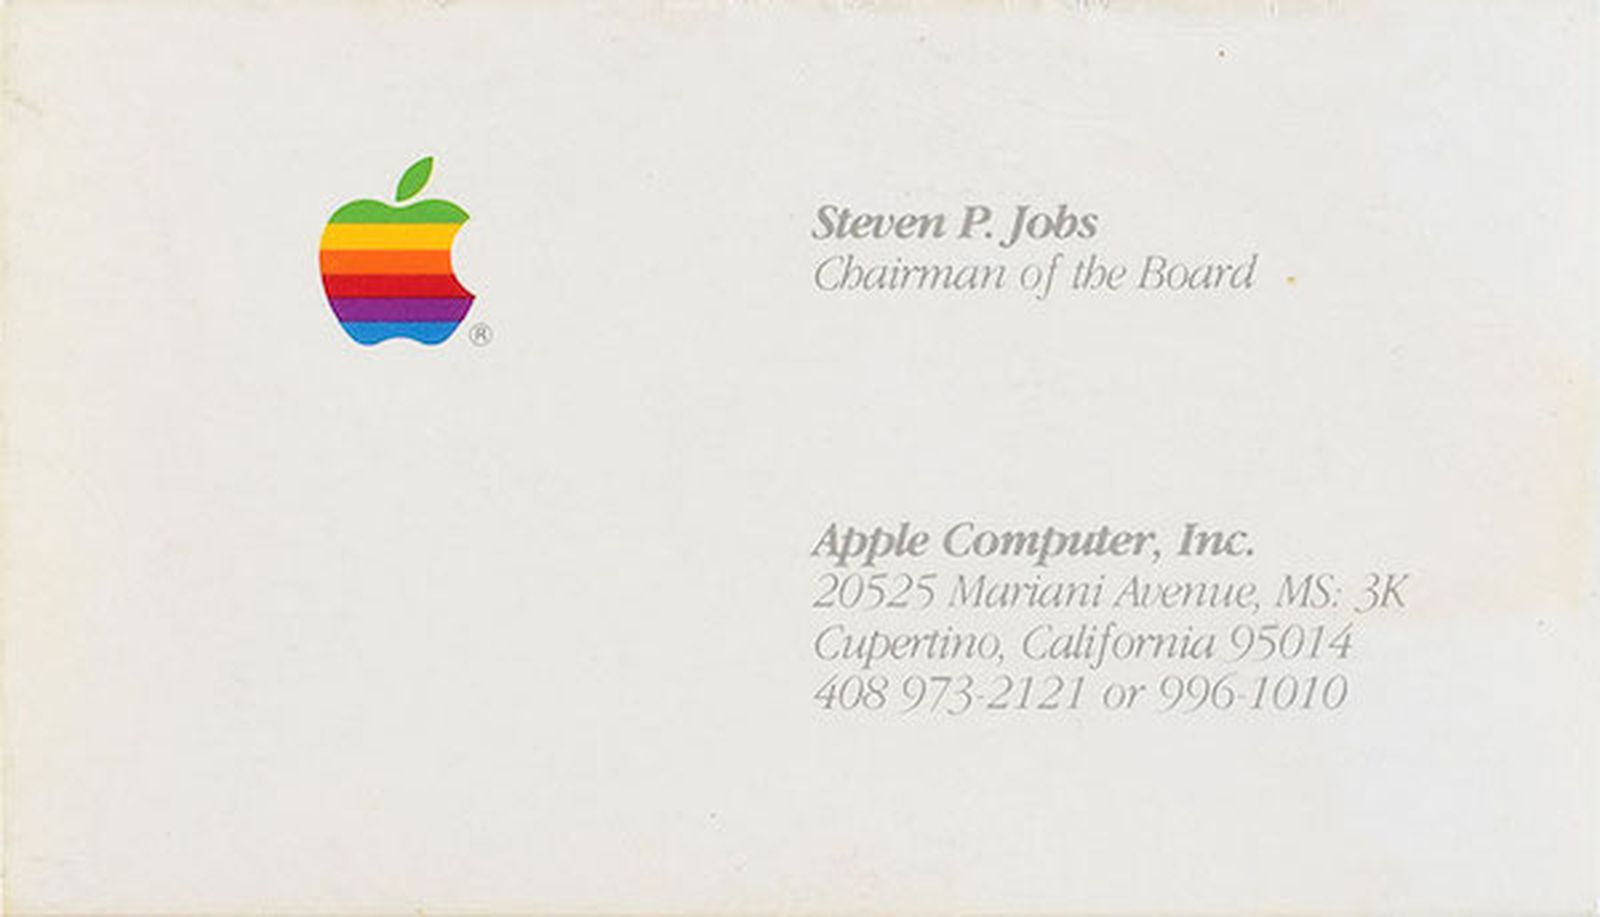 Just Paid Over for a Steve Jobs Business Card - MacRumors